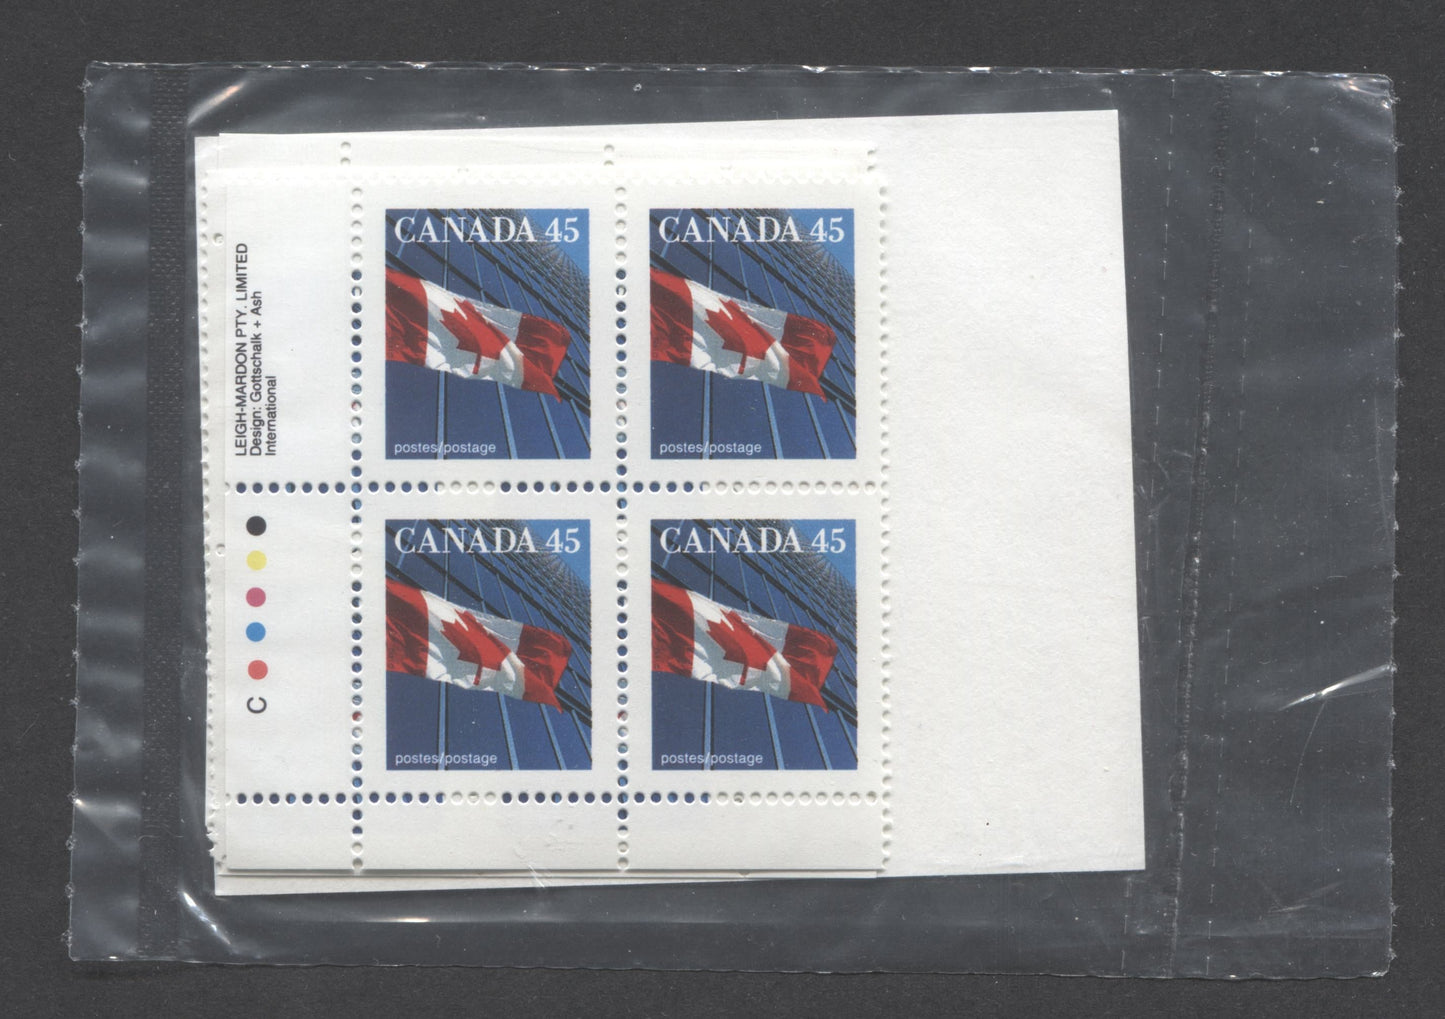 Lot 39 Canada #1361 45c Multicoloured 1995 Domestic First-Class Rate Issue, Canada Post Sealed Pack of Inscription Blocks, Leigh Mardon Printing On DF CPP Paper, With HB Type 6C Insert Card, VFNH, Unitrade Cat. $20